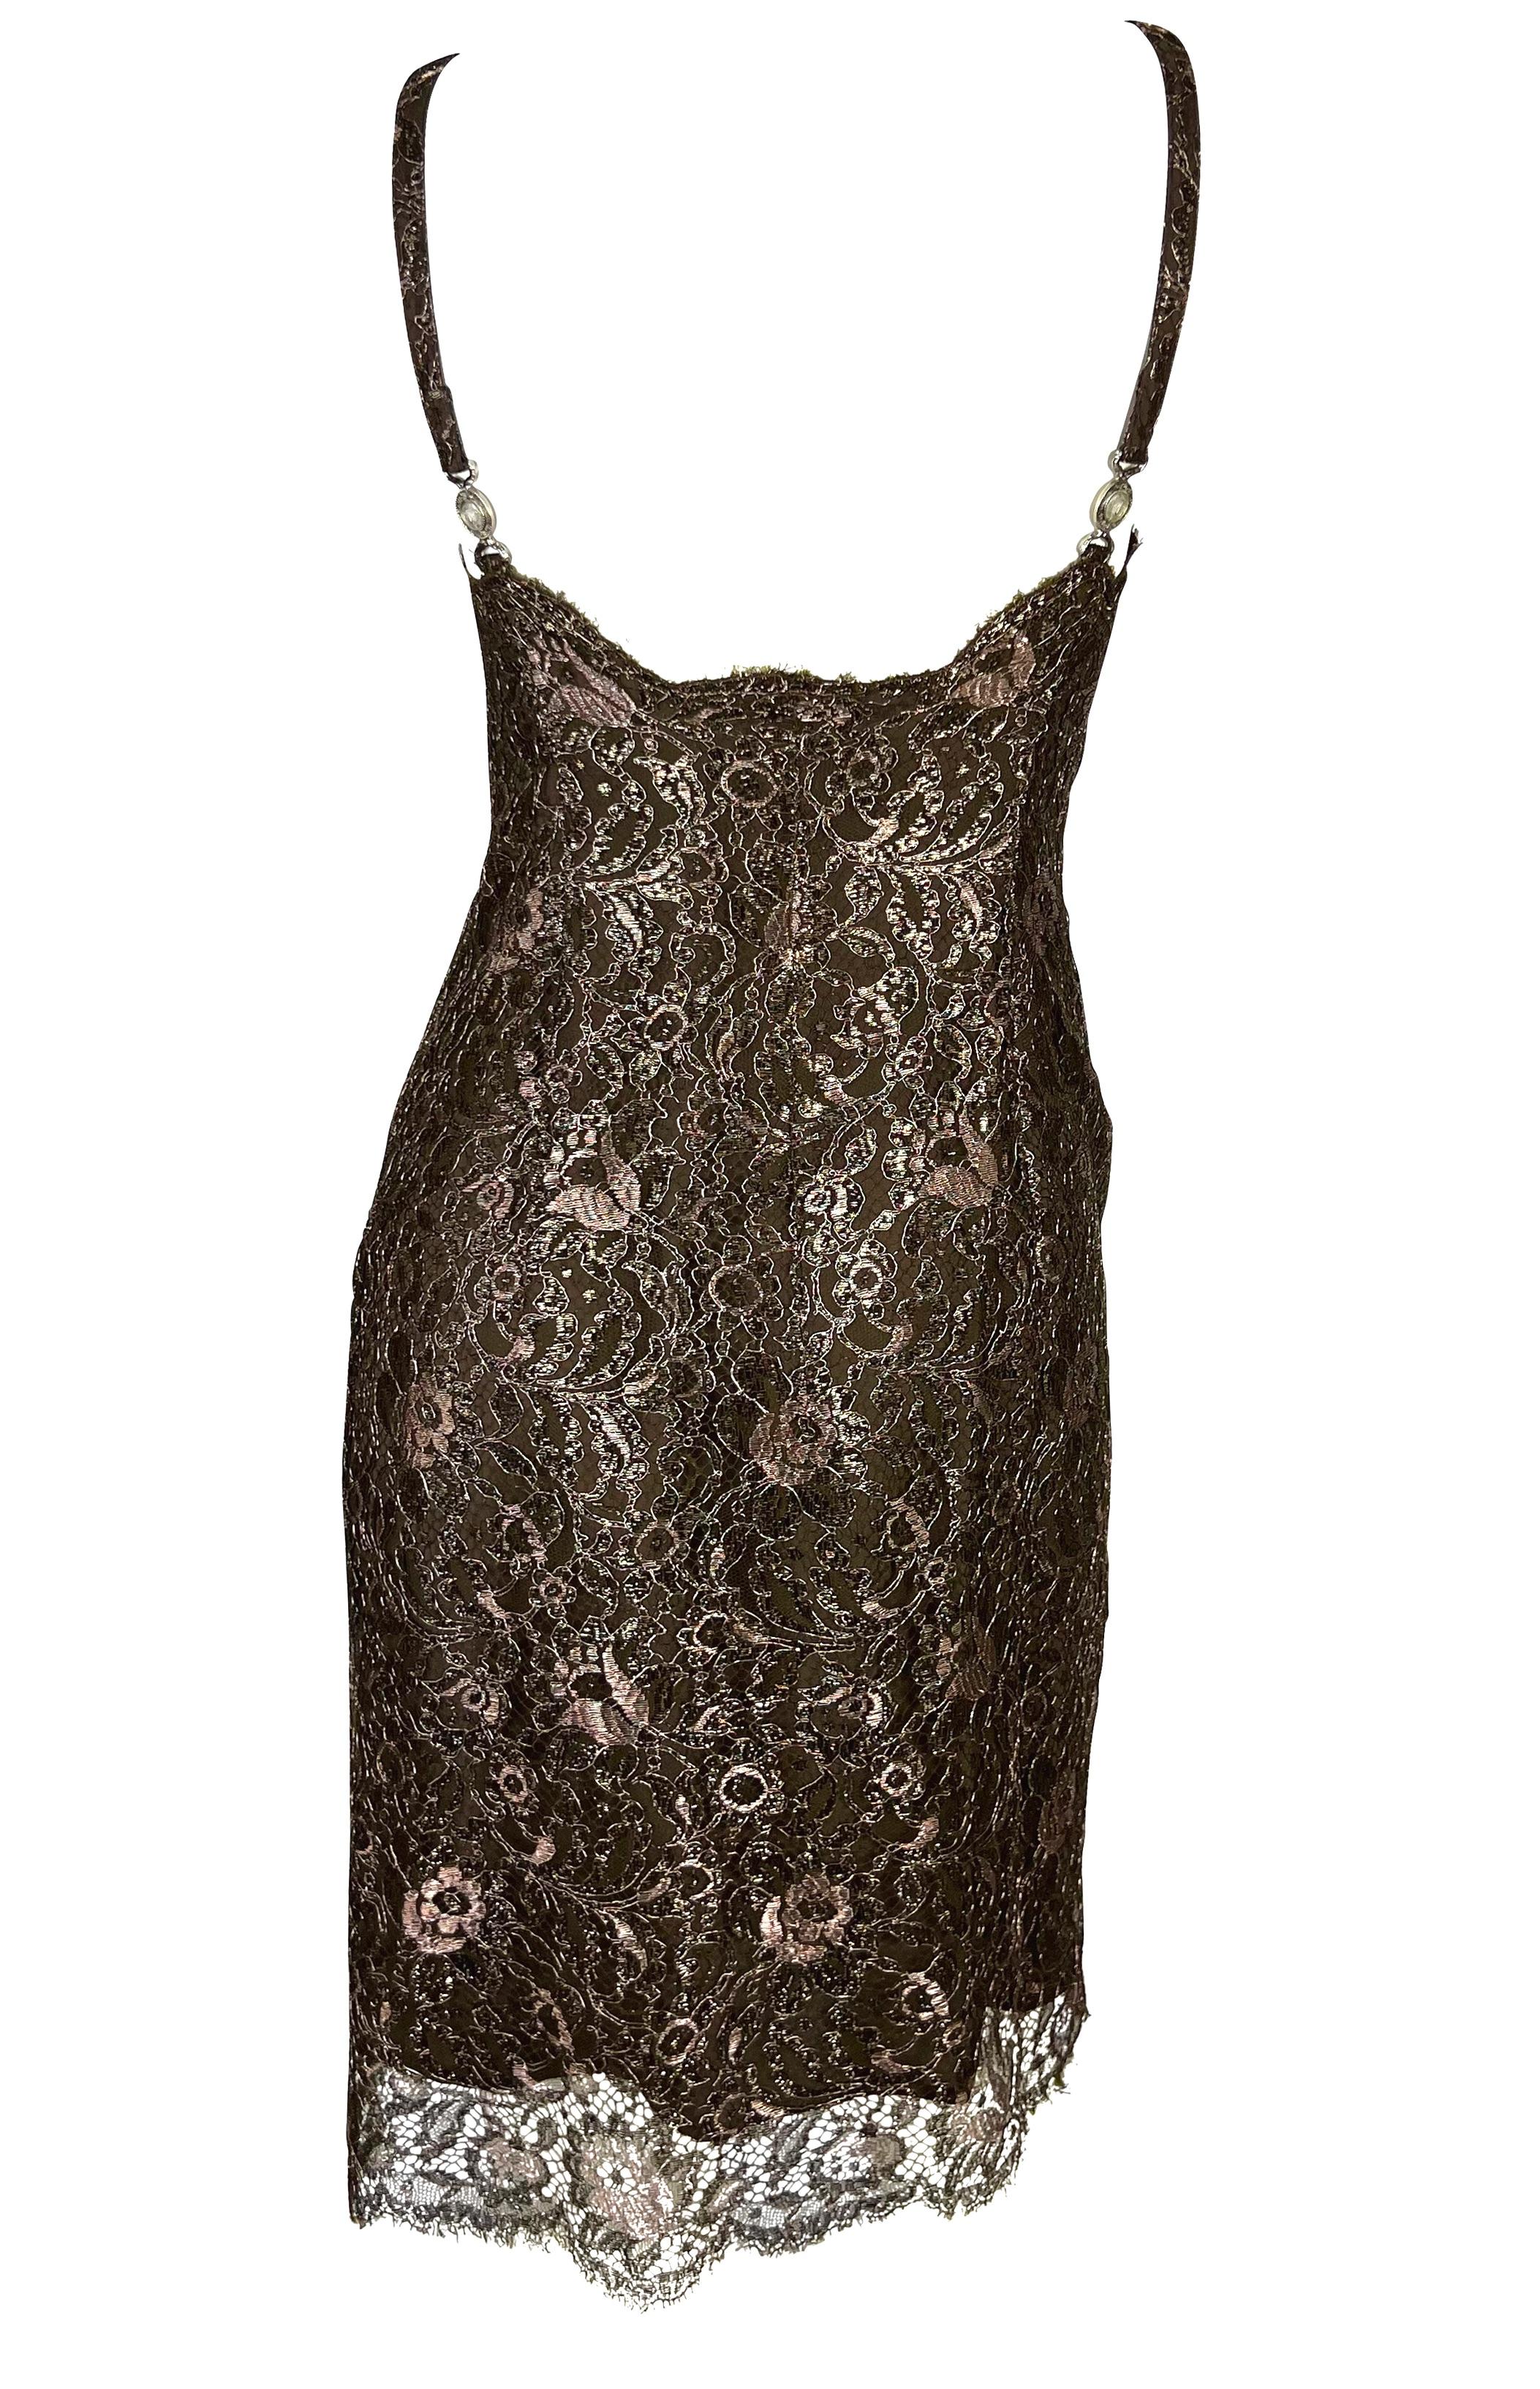 F/W 1996 Gianni Versace Couture Metallic Brown Floral Lace Medusa Mini Dress In Good Condition For Sale In West Hollywood, CA